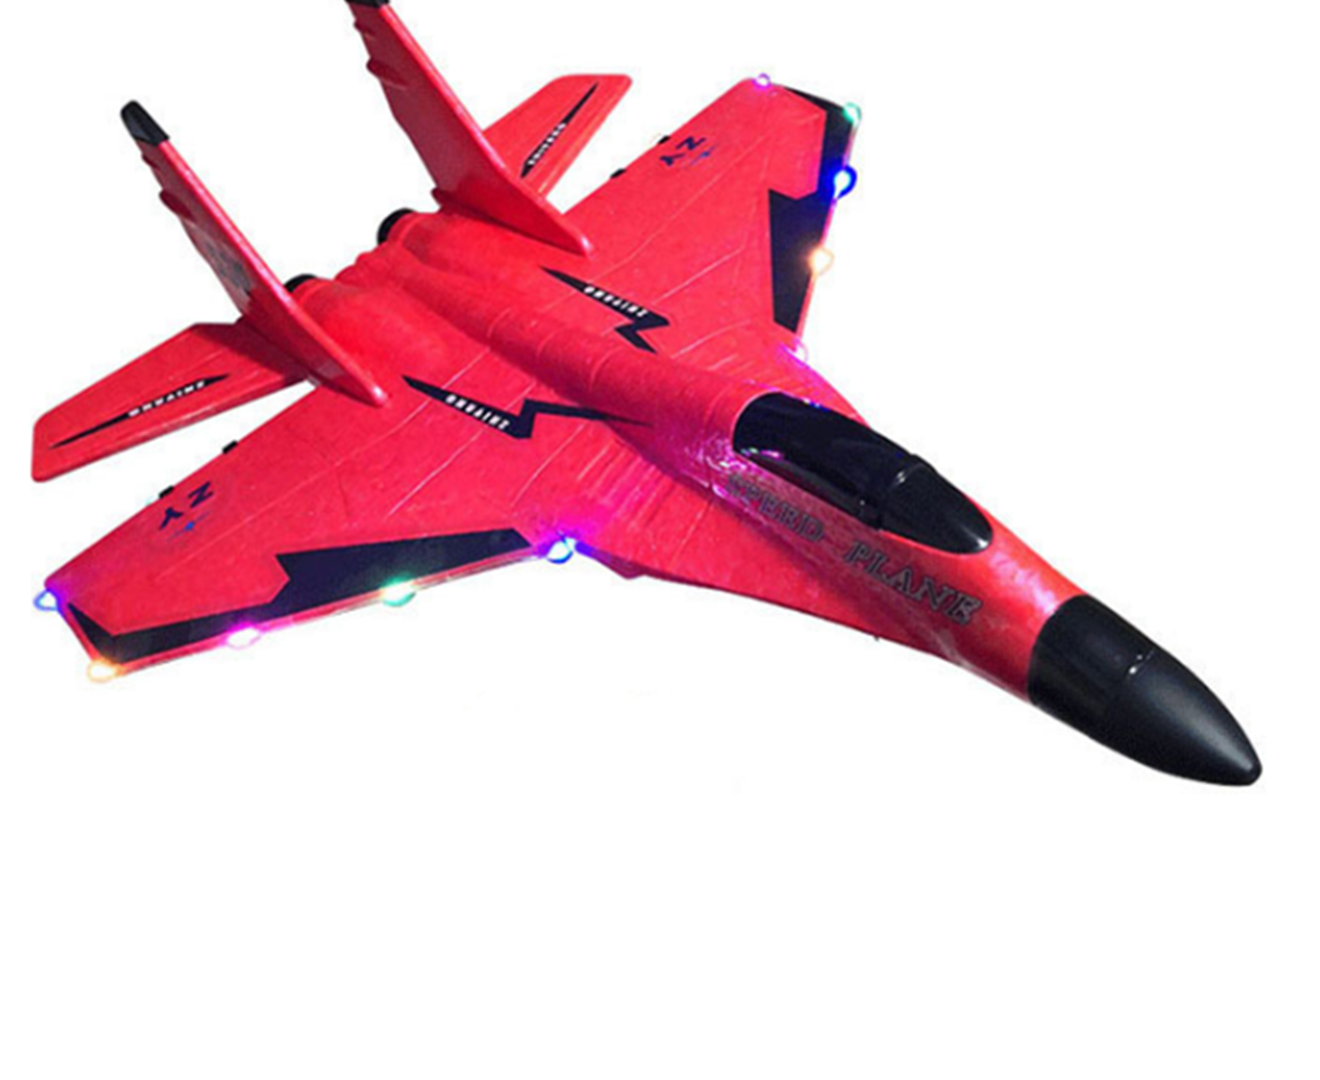 A03 3 In 1 Foam Airplane Model Toy Sea Land and Air Remote Control Airplane Glider Unmanned Aerial Vehicle with Light-Red